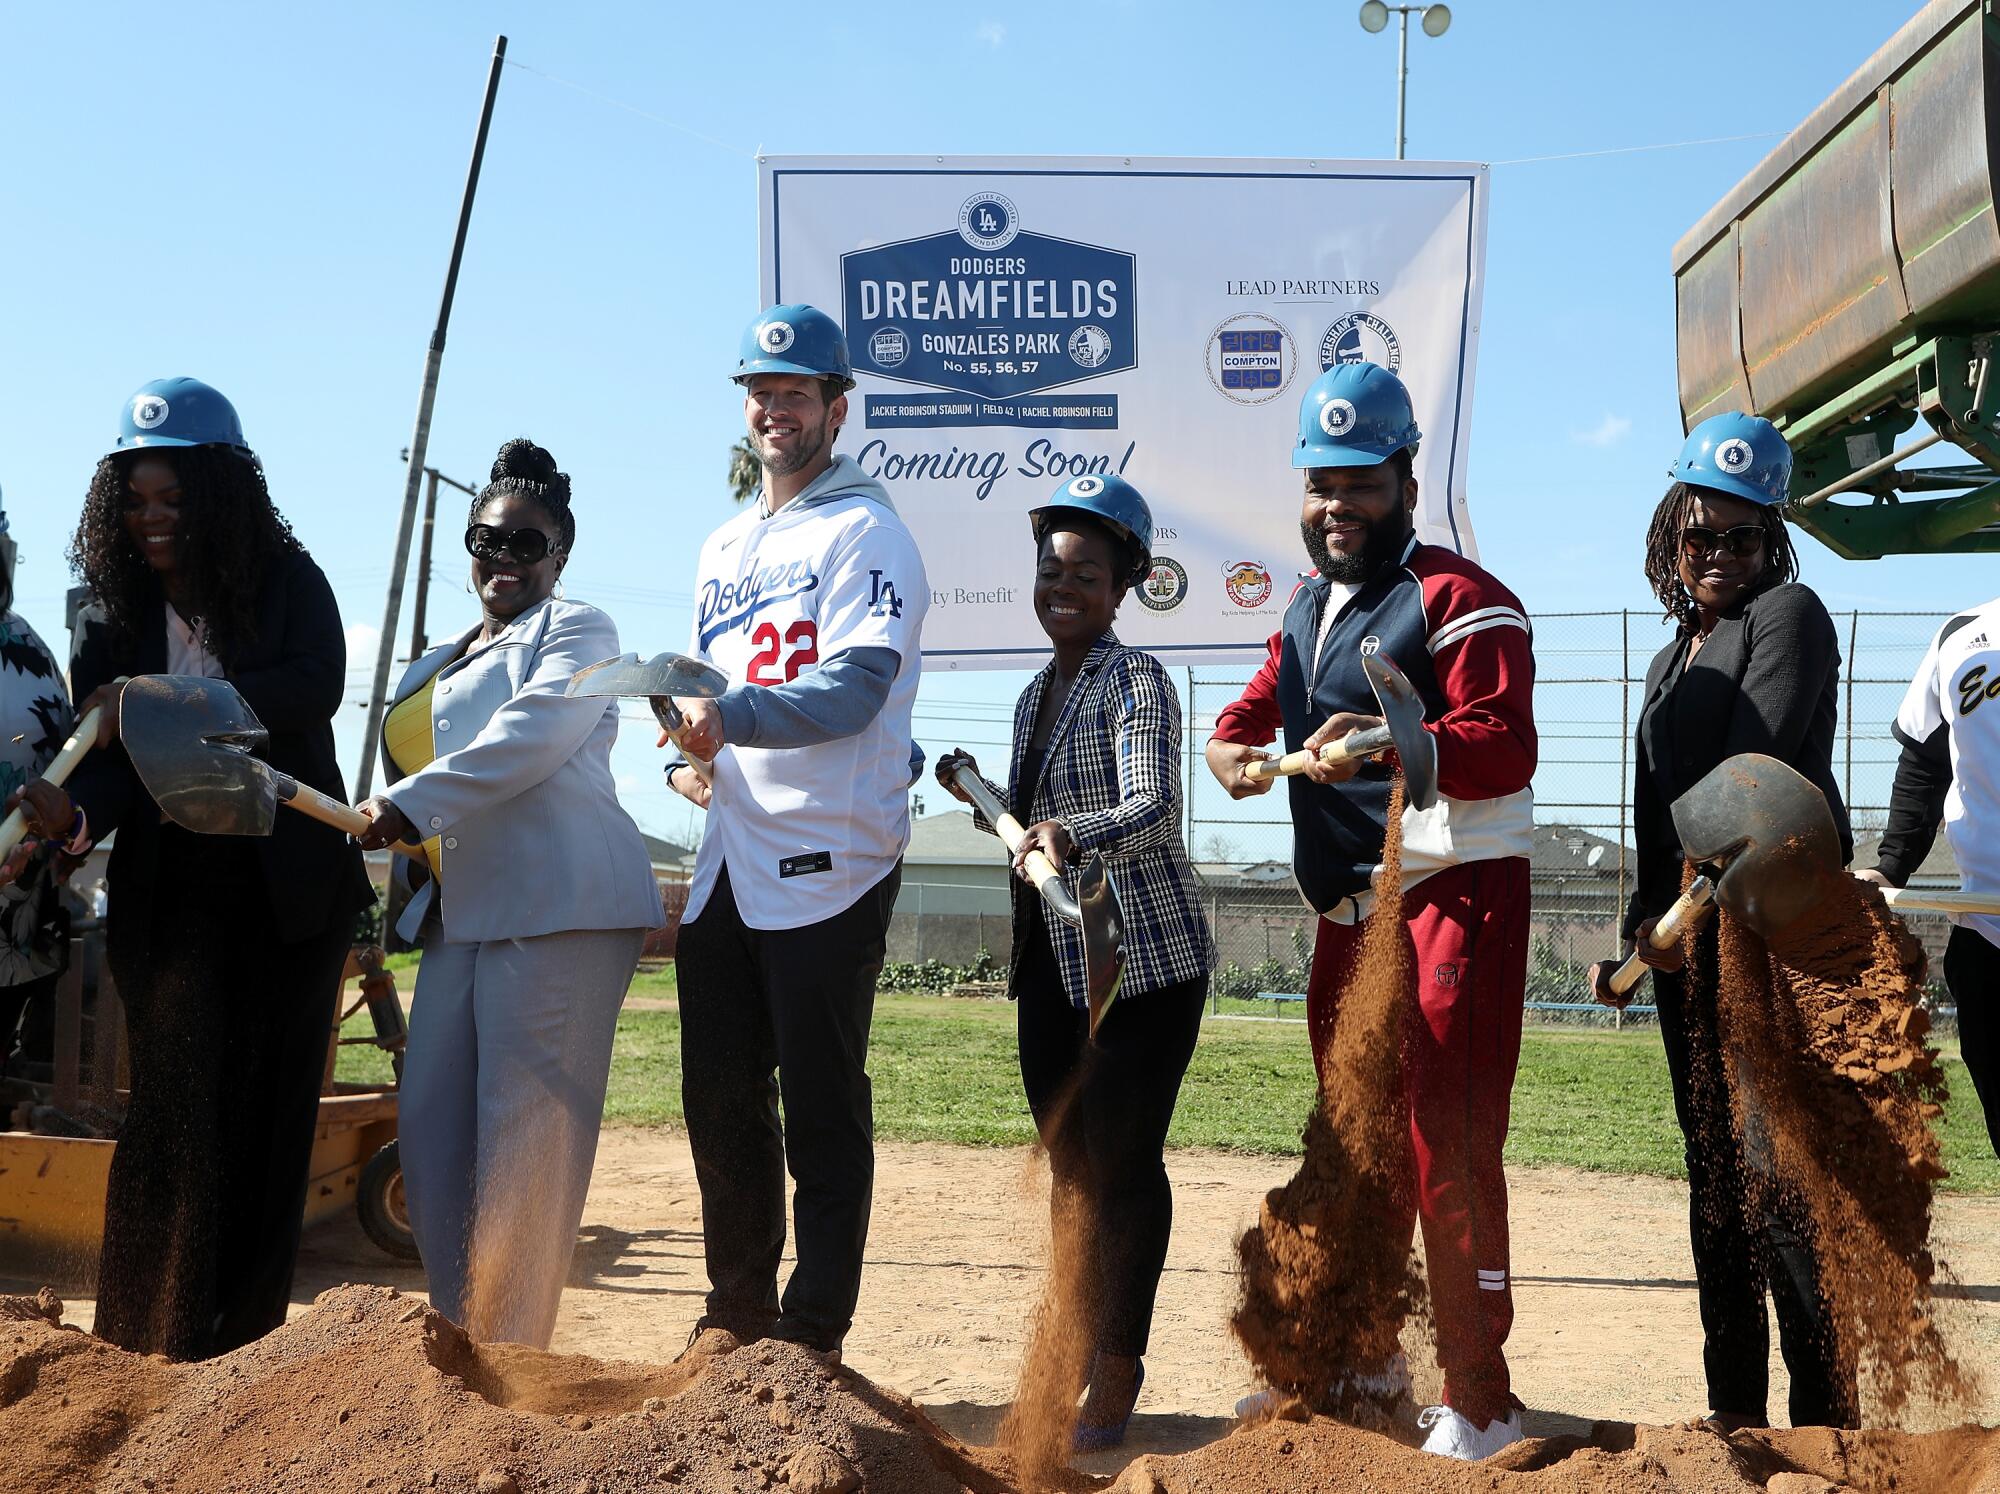  Dodgers Dreamfields Groundbreaking at Gonzales Park on February 12, 2020 in Compton, California.